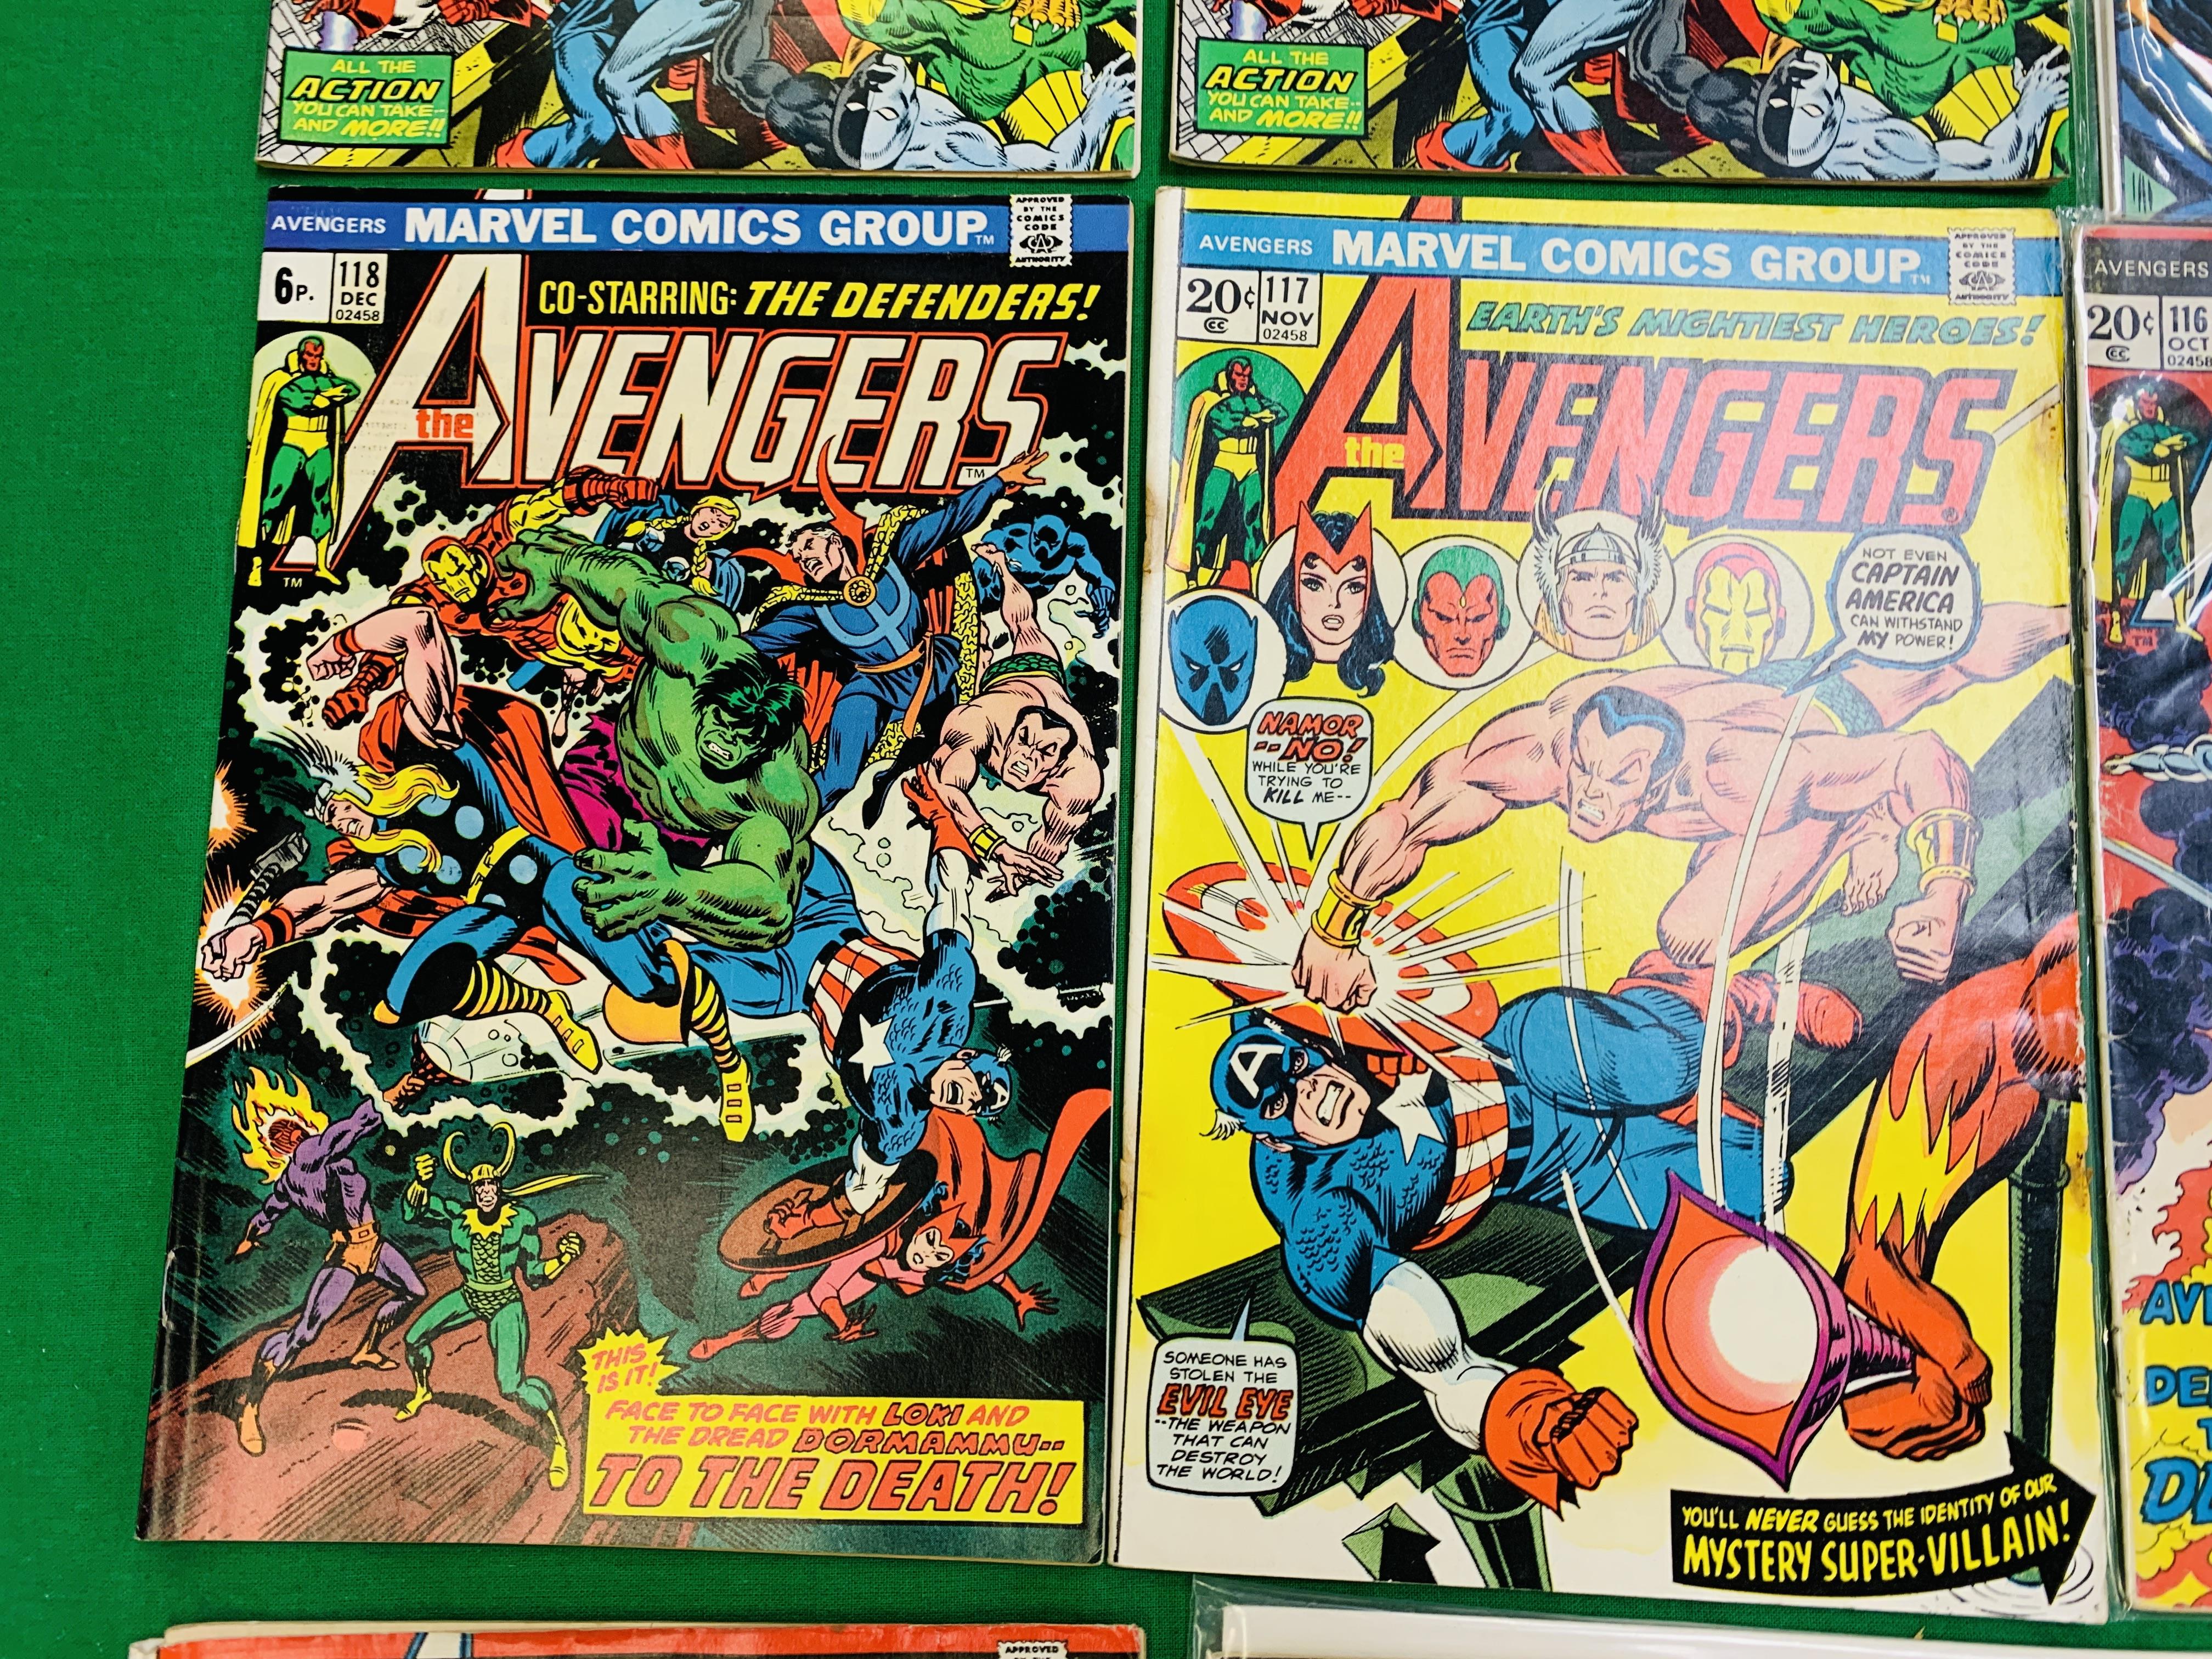 MARVEL COMICS THE AVENGERS NO. 101 - 299, MISSING ISSUES 103 AND 110. - Image 7 of 130